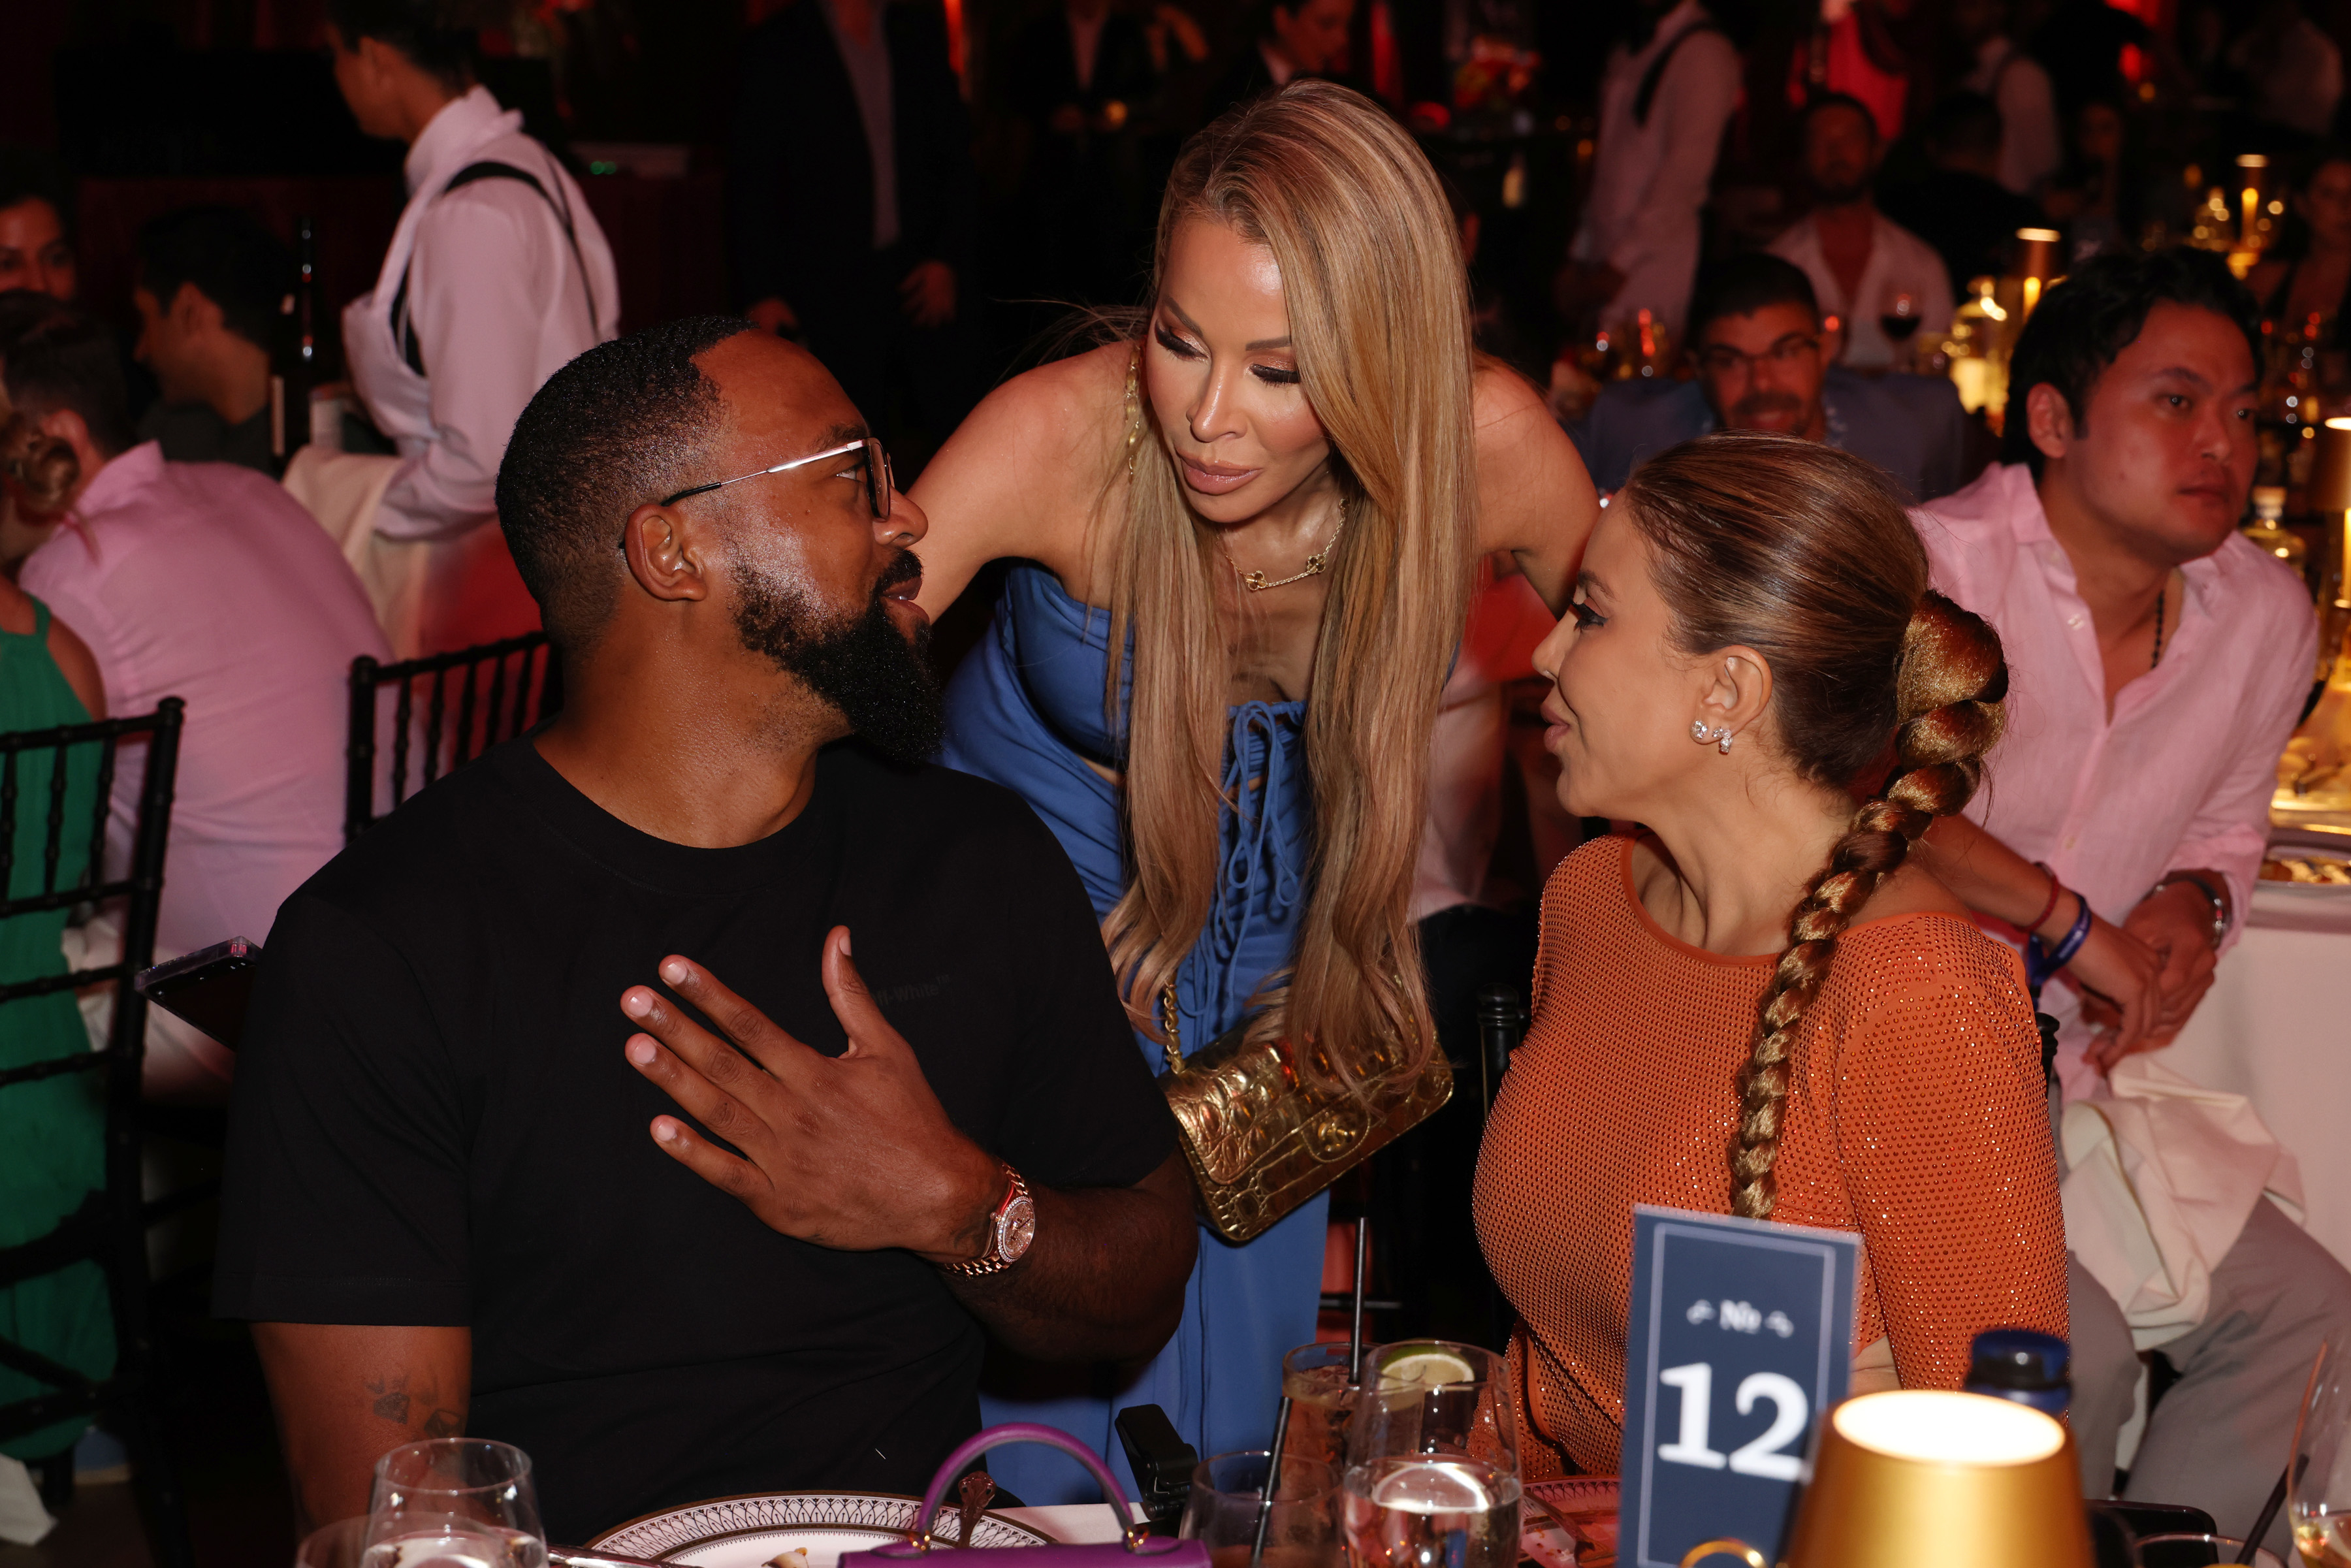 Lisa Hochstein leaning down to speak to Marcus and Larsa who are sitting at a round dinner during an event